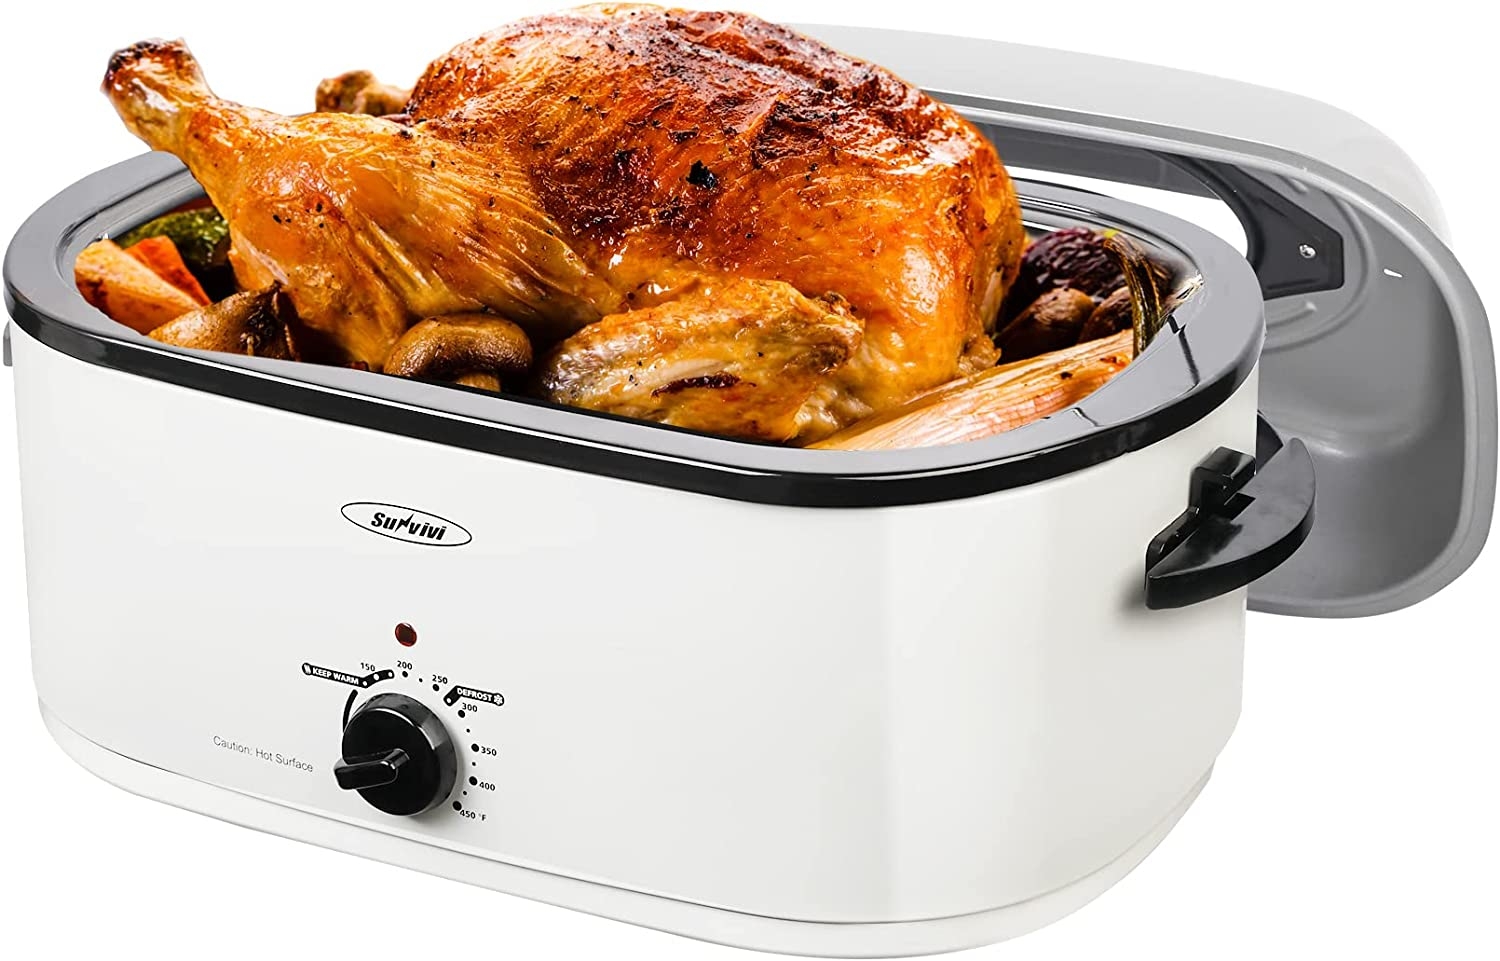 22lb 18-Quart Roaster Oven with Self-Basting Lid, Sunvivi electric roaster with Removable Pan & Rack, 150-450°F Full-Range